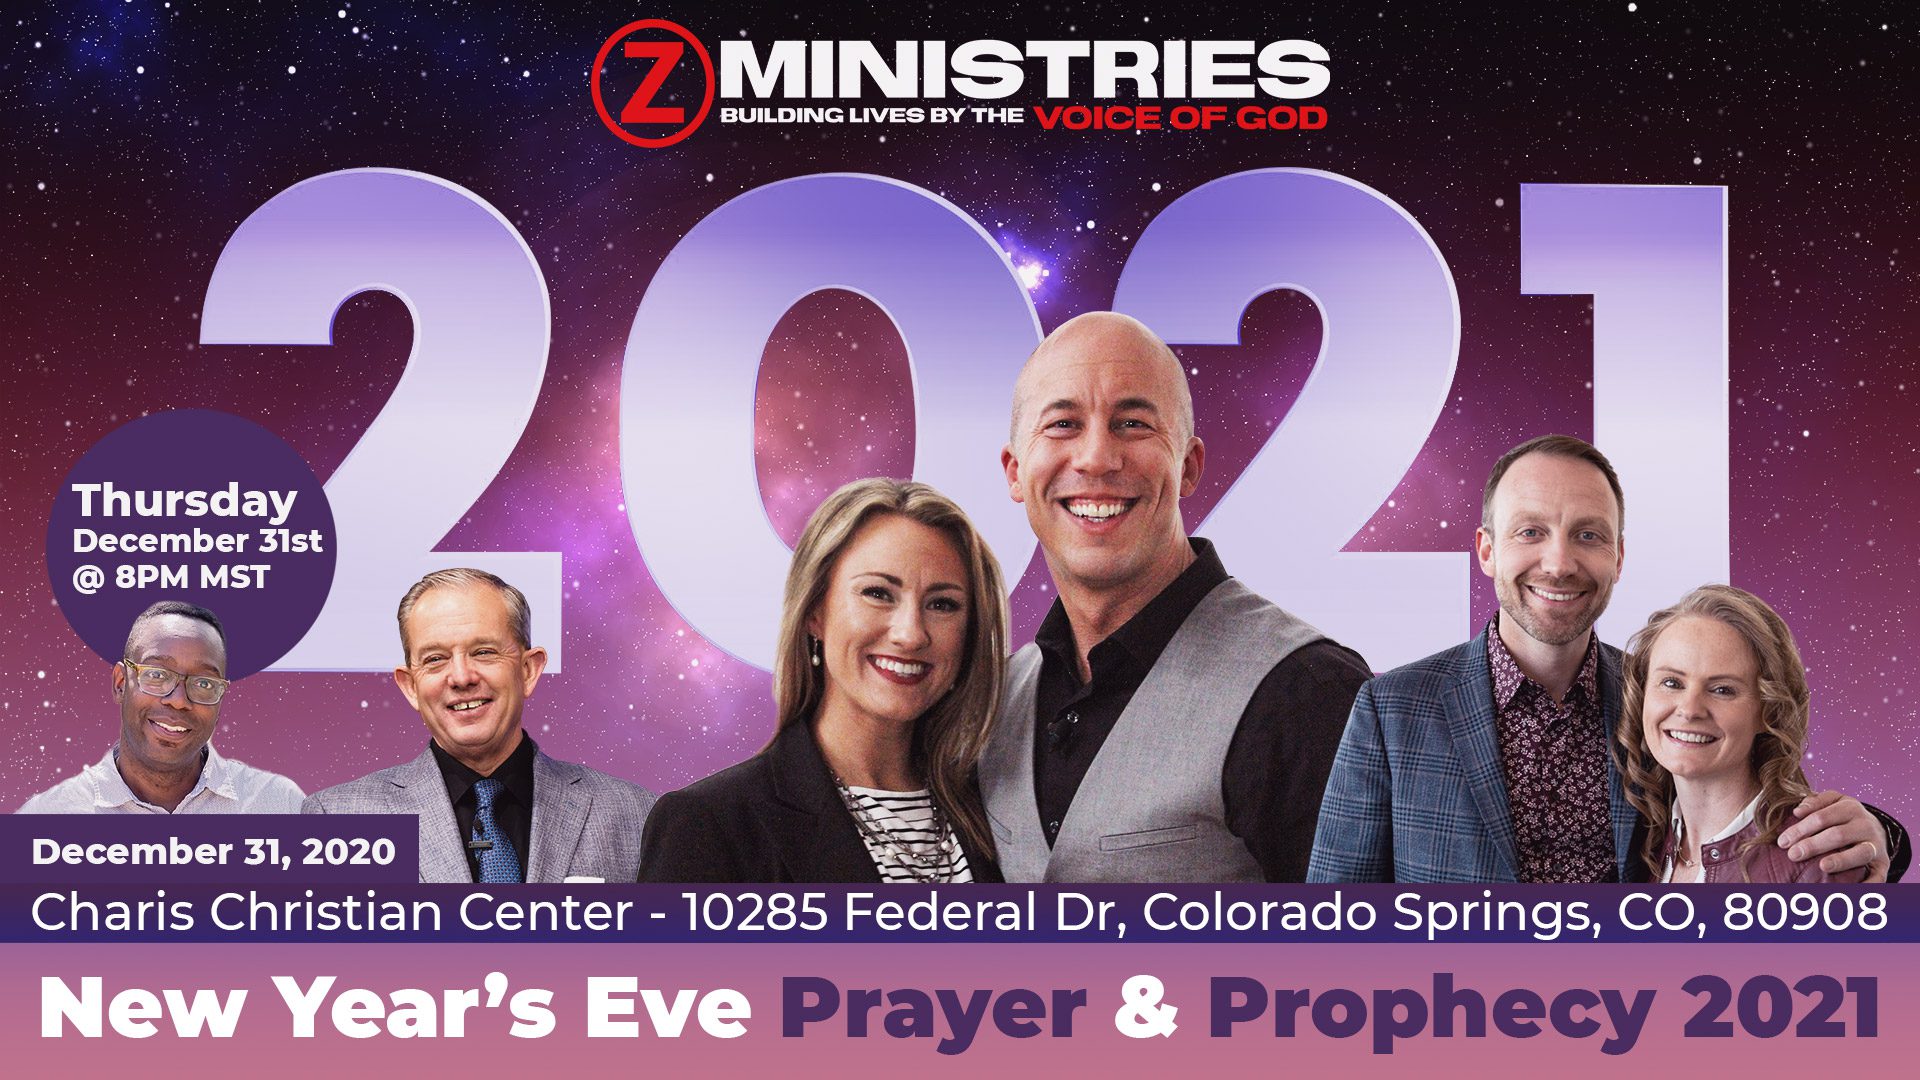 New Year's Eve Prayer & Prophecy 2021 with Guest Speakers Ashley and Carlie Terradez